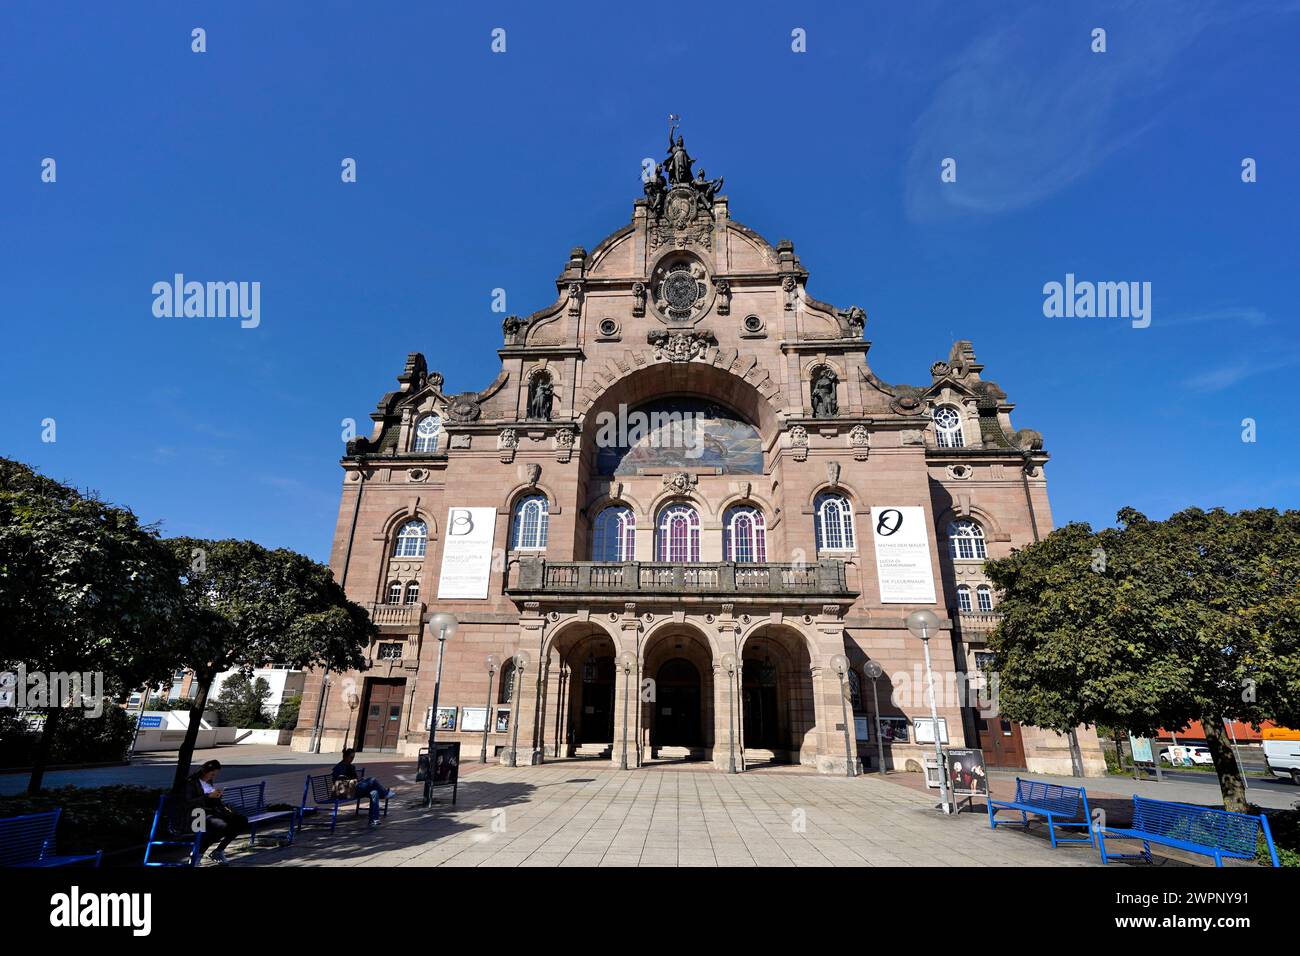 Germany, Bavaria, Middle Franconia, Nuremberg, Old Town, Opera House, State Theater Stock Photo